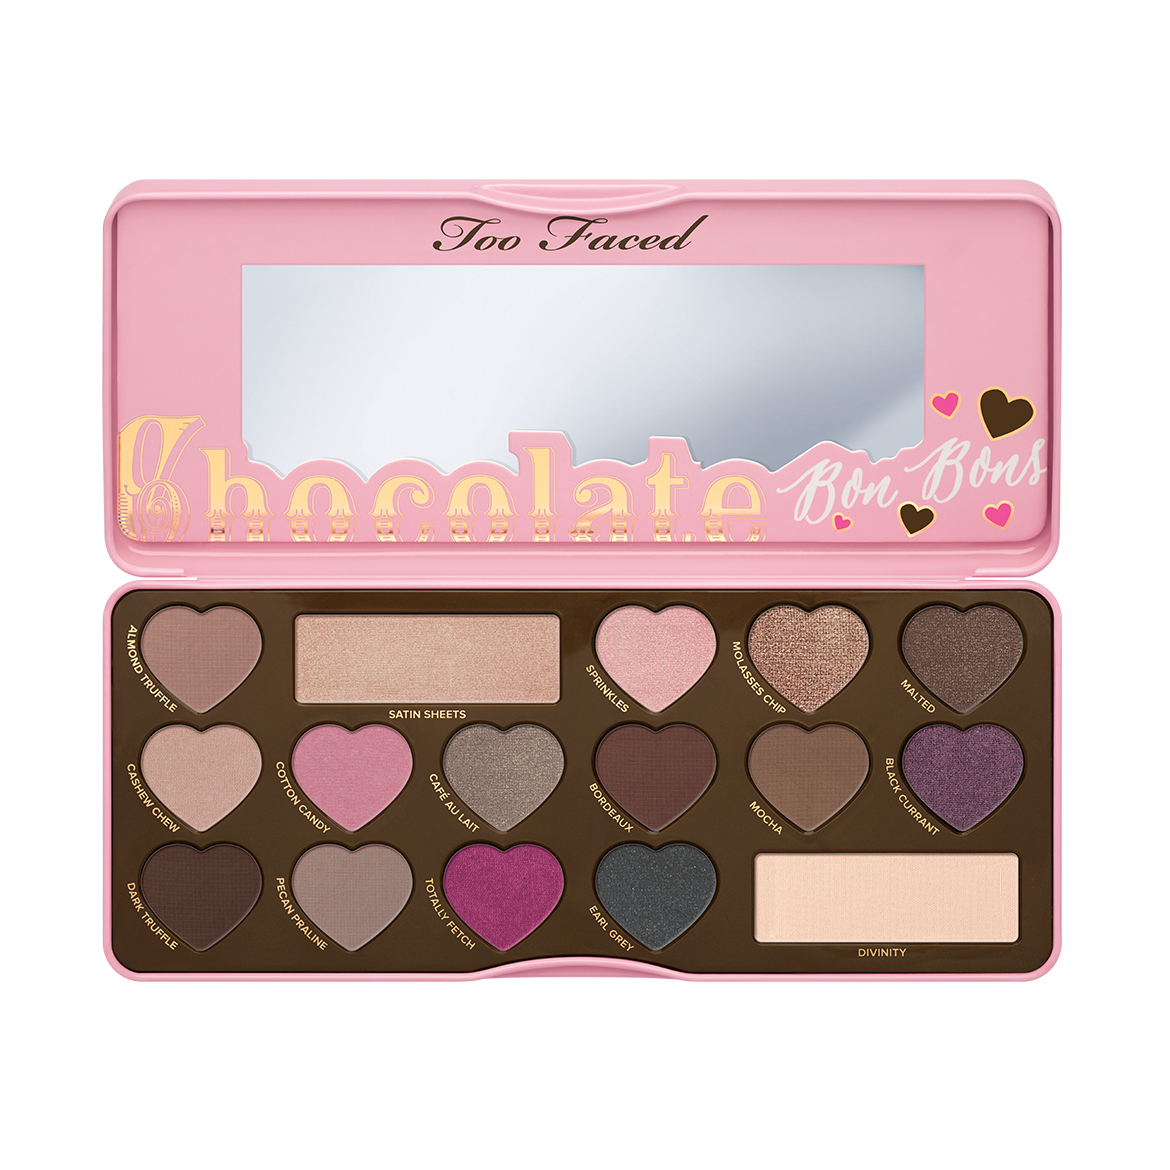 Too Faced Chocolate Bon Bons Palette - best eyeshadow palettes for green eyes